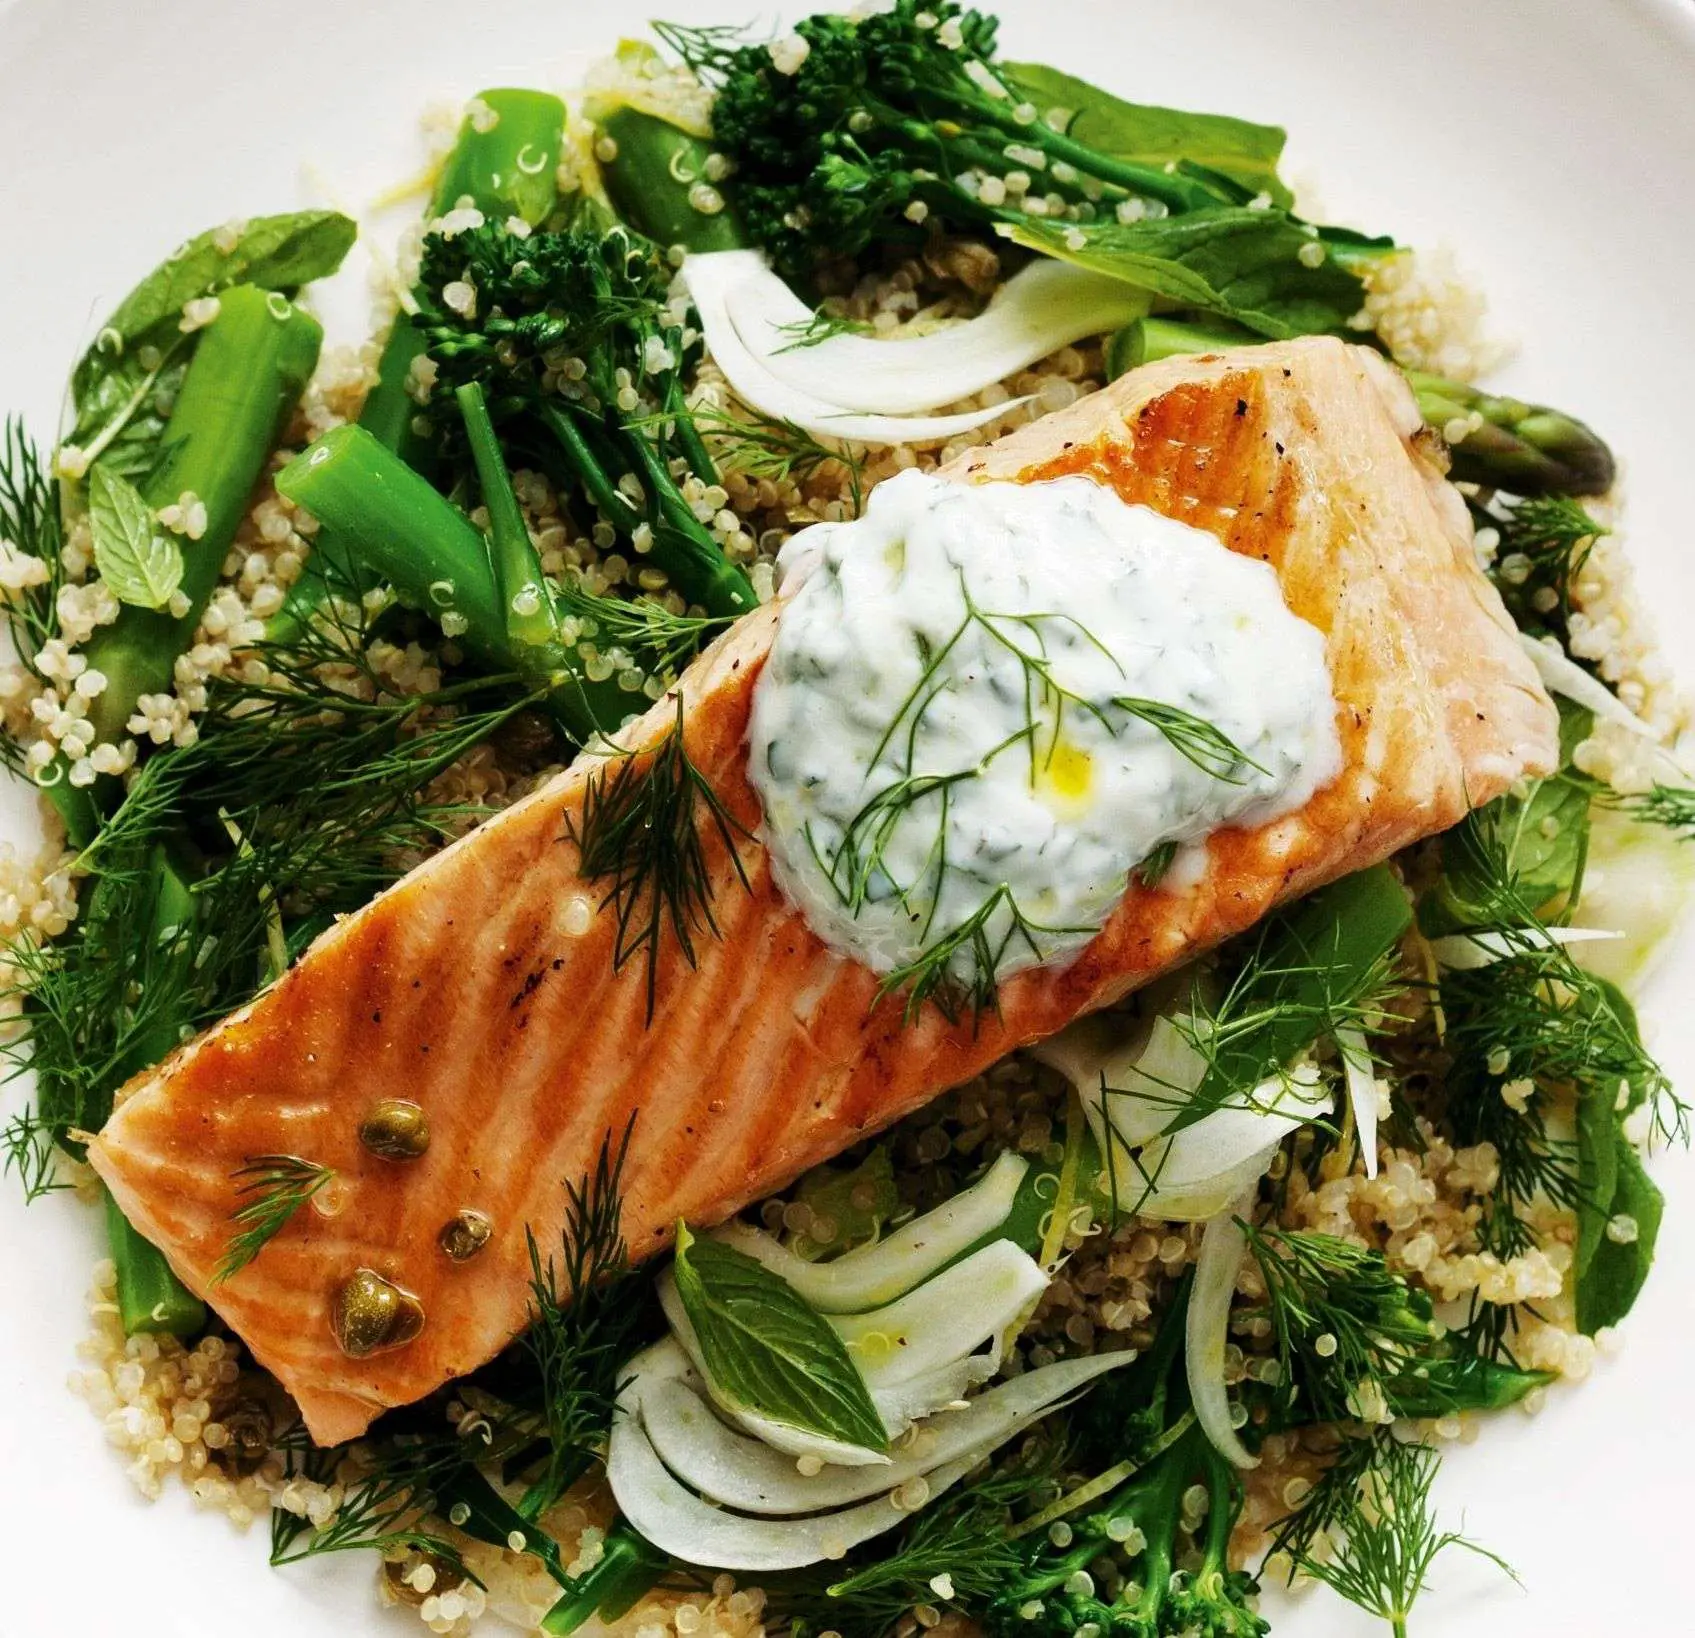 Grilled salmon served over a bed of couscous, greens and ...